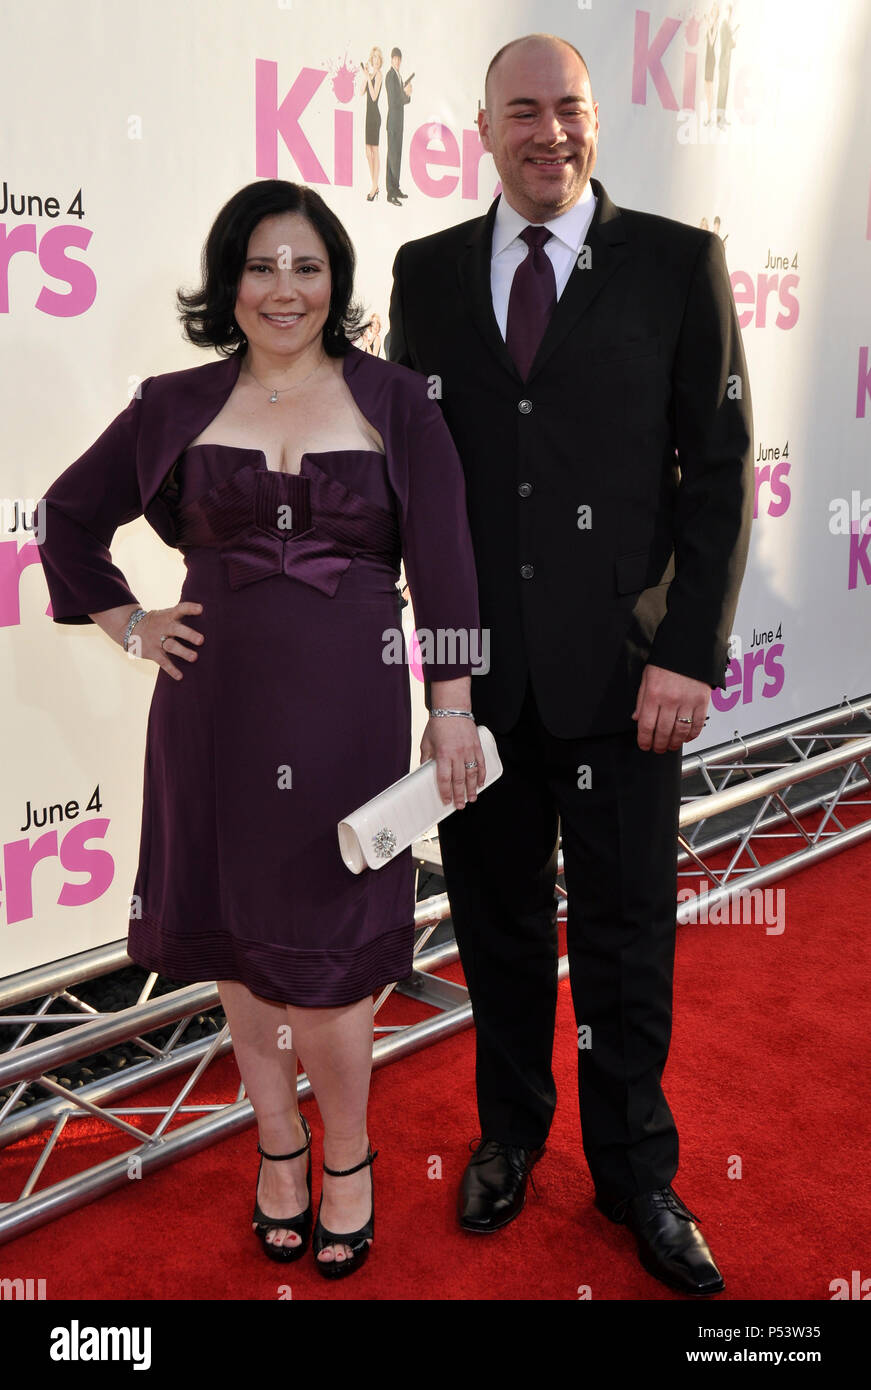 Alex Borstein & husband   - 'The Killers' Premiere at the Arclight Theatre in Los Angeles.Alex Borstein & husband  46  Event in Hollywood Life - California, Red Carpet Event, USA, Film Industry, Celebrities, Photography, Bestof, Arts Culture and Entertainment, Celebrities fashion, Best of, Hollywood Life, Event in Hollywood Life - California, Red Carpet and backstage, Music celebrities, Topix, Couple, family ( husband and wife ) and kids- Children, brothers and sisters inquiry tsuni@Gamma-USA.com, Credit Tsuni / USA, 2010 Stock Photo